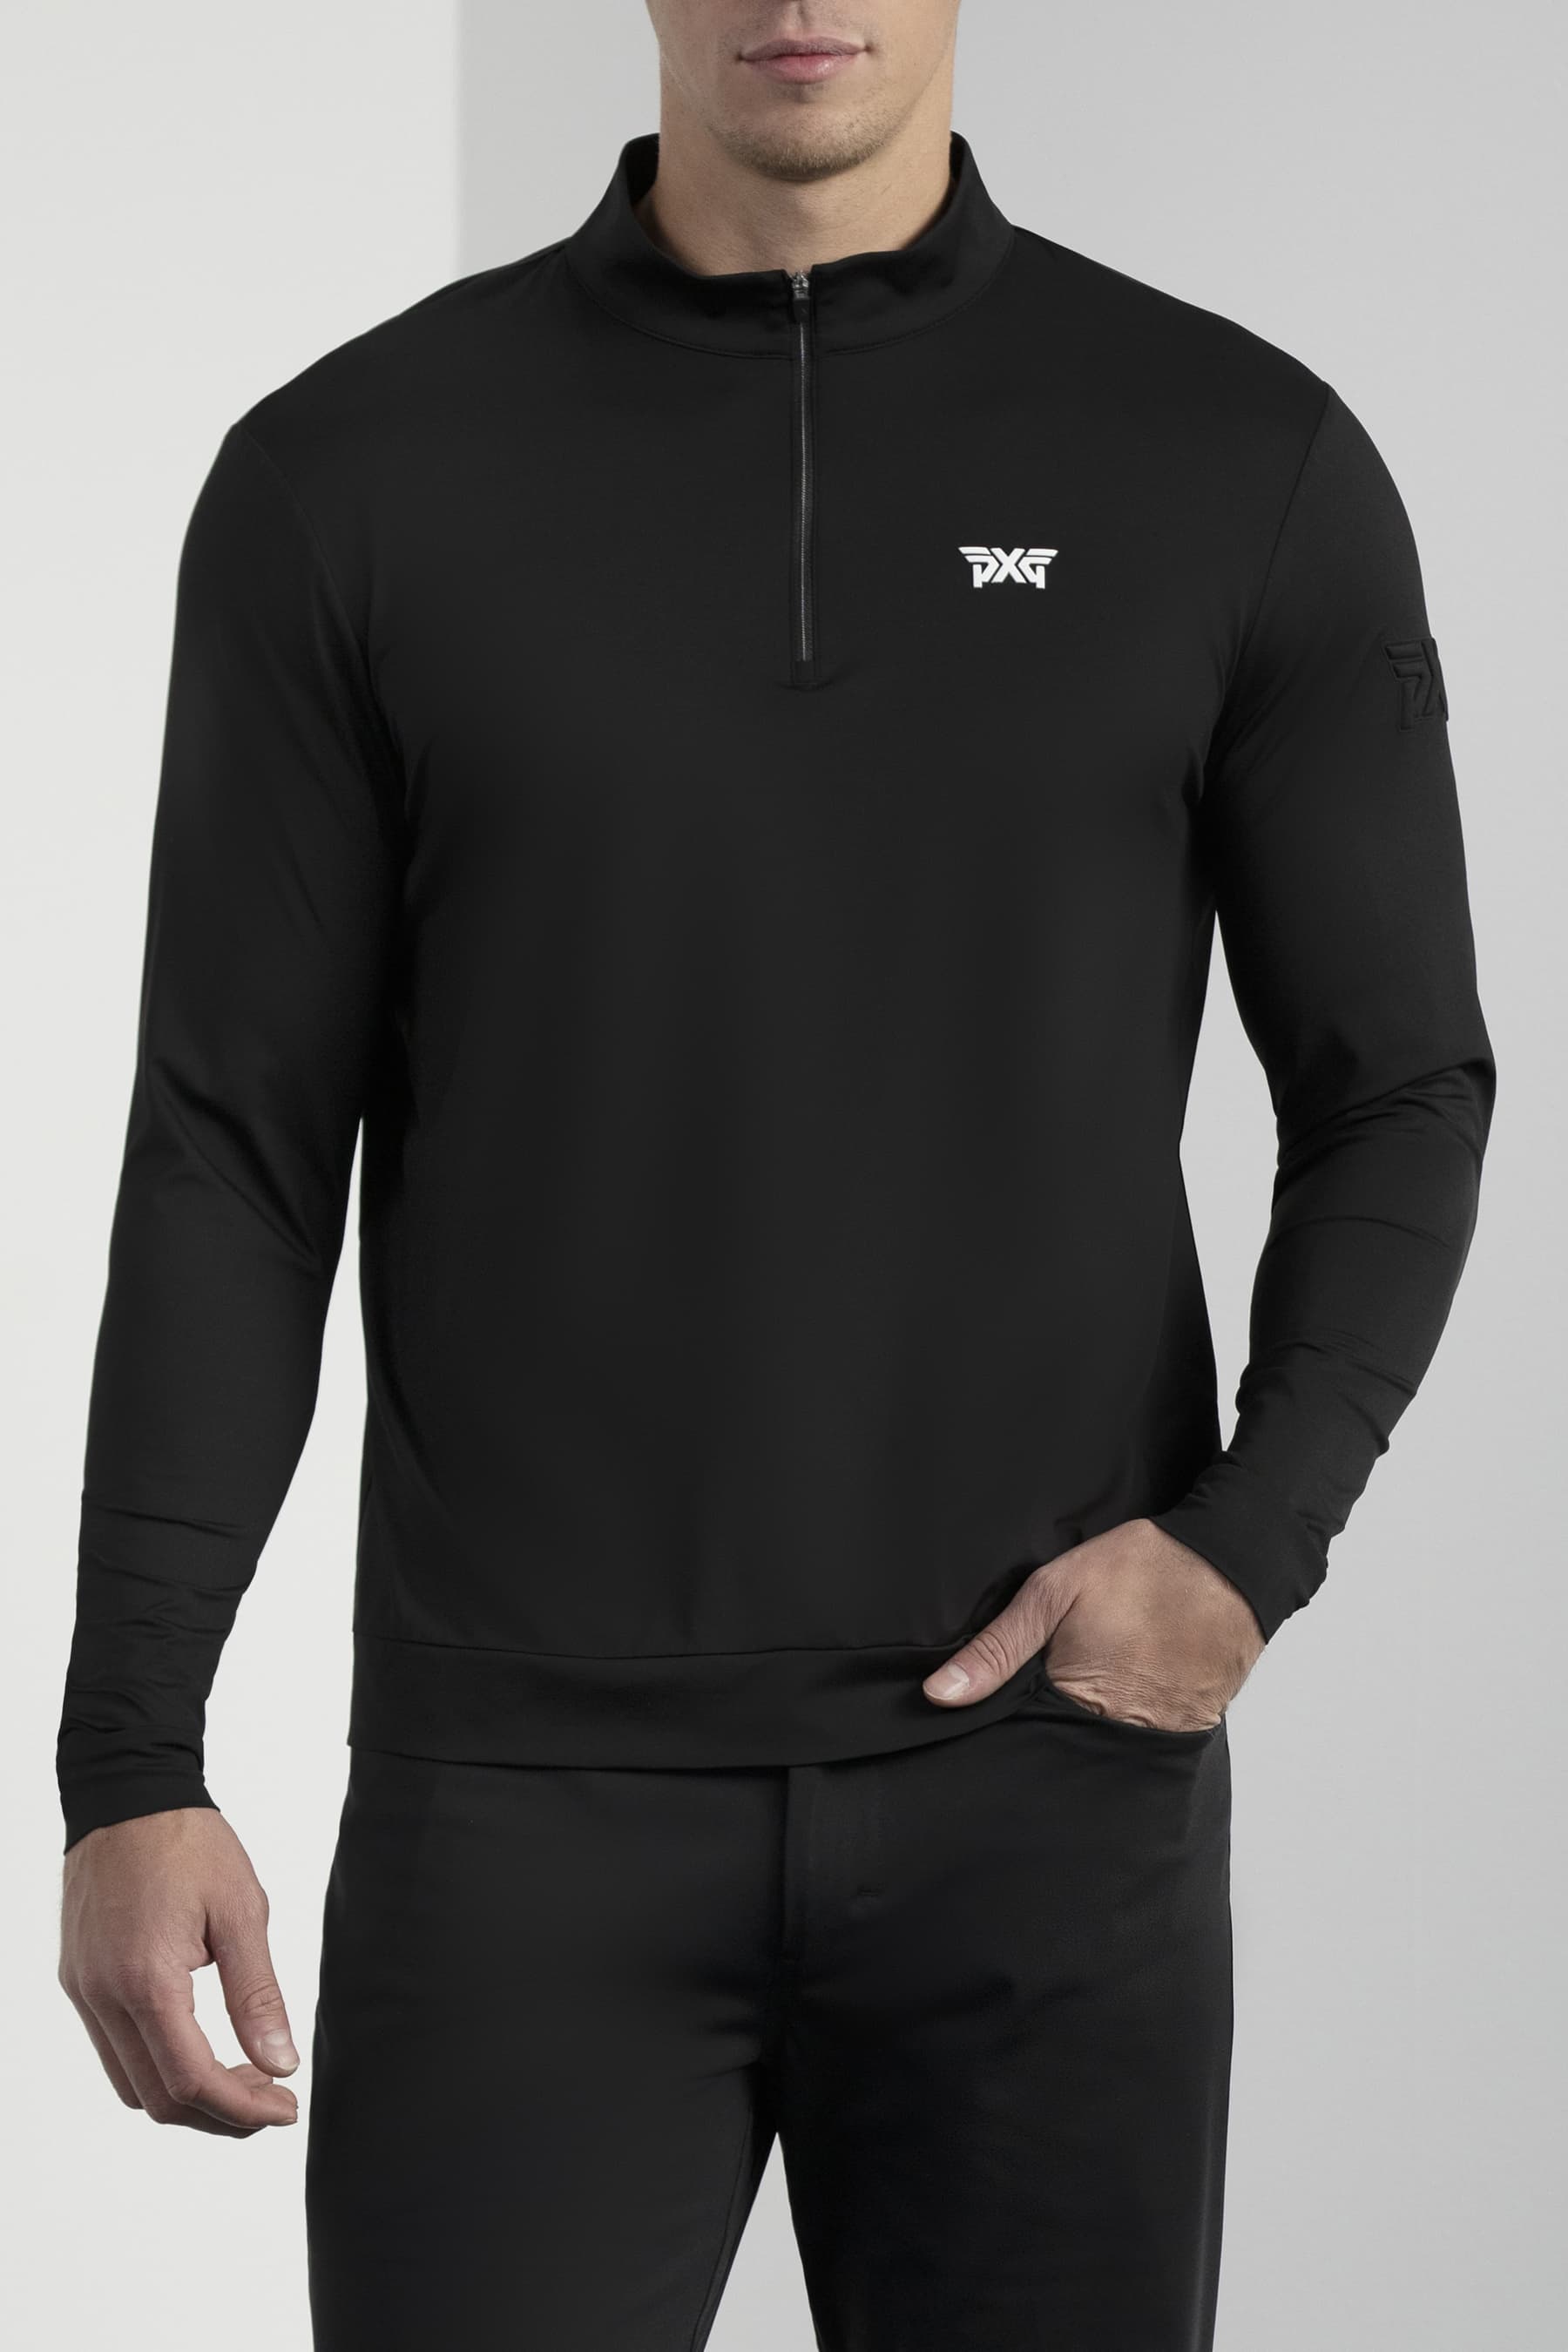 Essential Baselayer  Shop the Highest Quality Golf Apparel, Gear,  Accessories and Golf Clubs at PXG